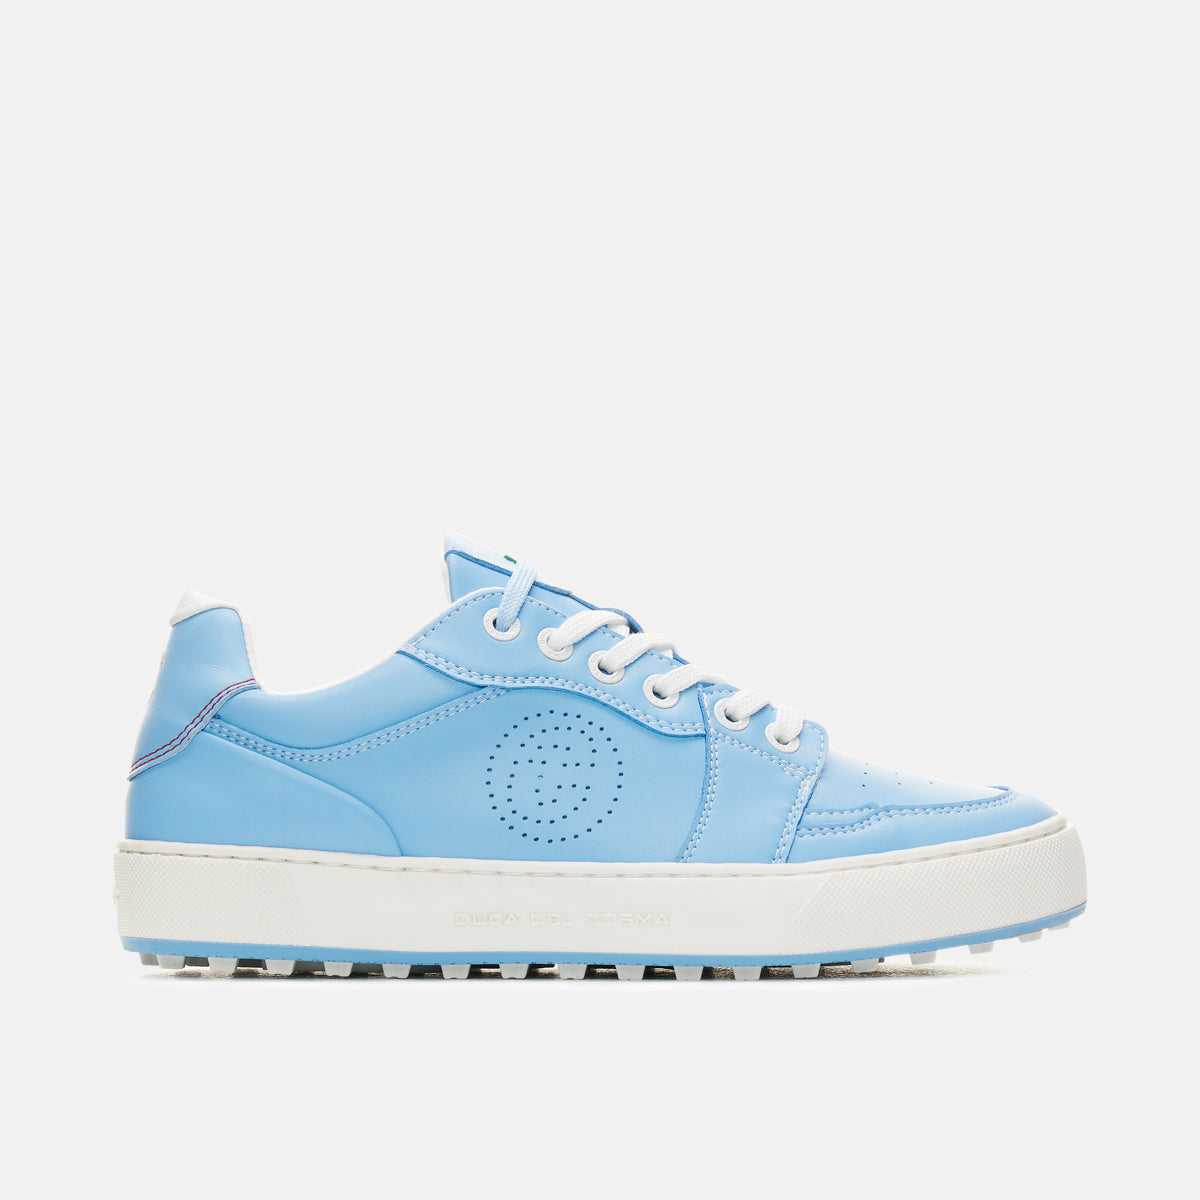 Duca del Cosma Giordana Light Blue golf shoe for women's is a sportive and stylish golf shoe